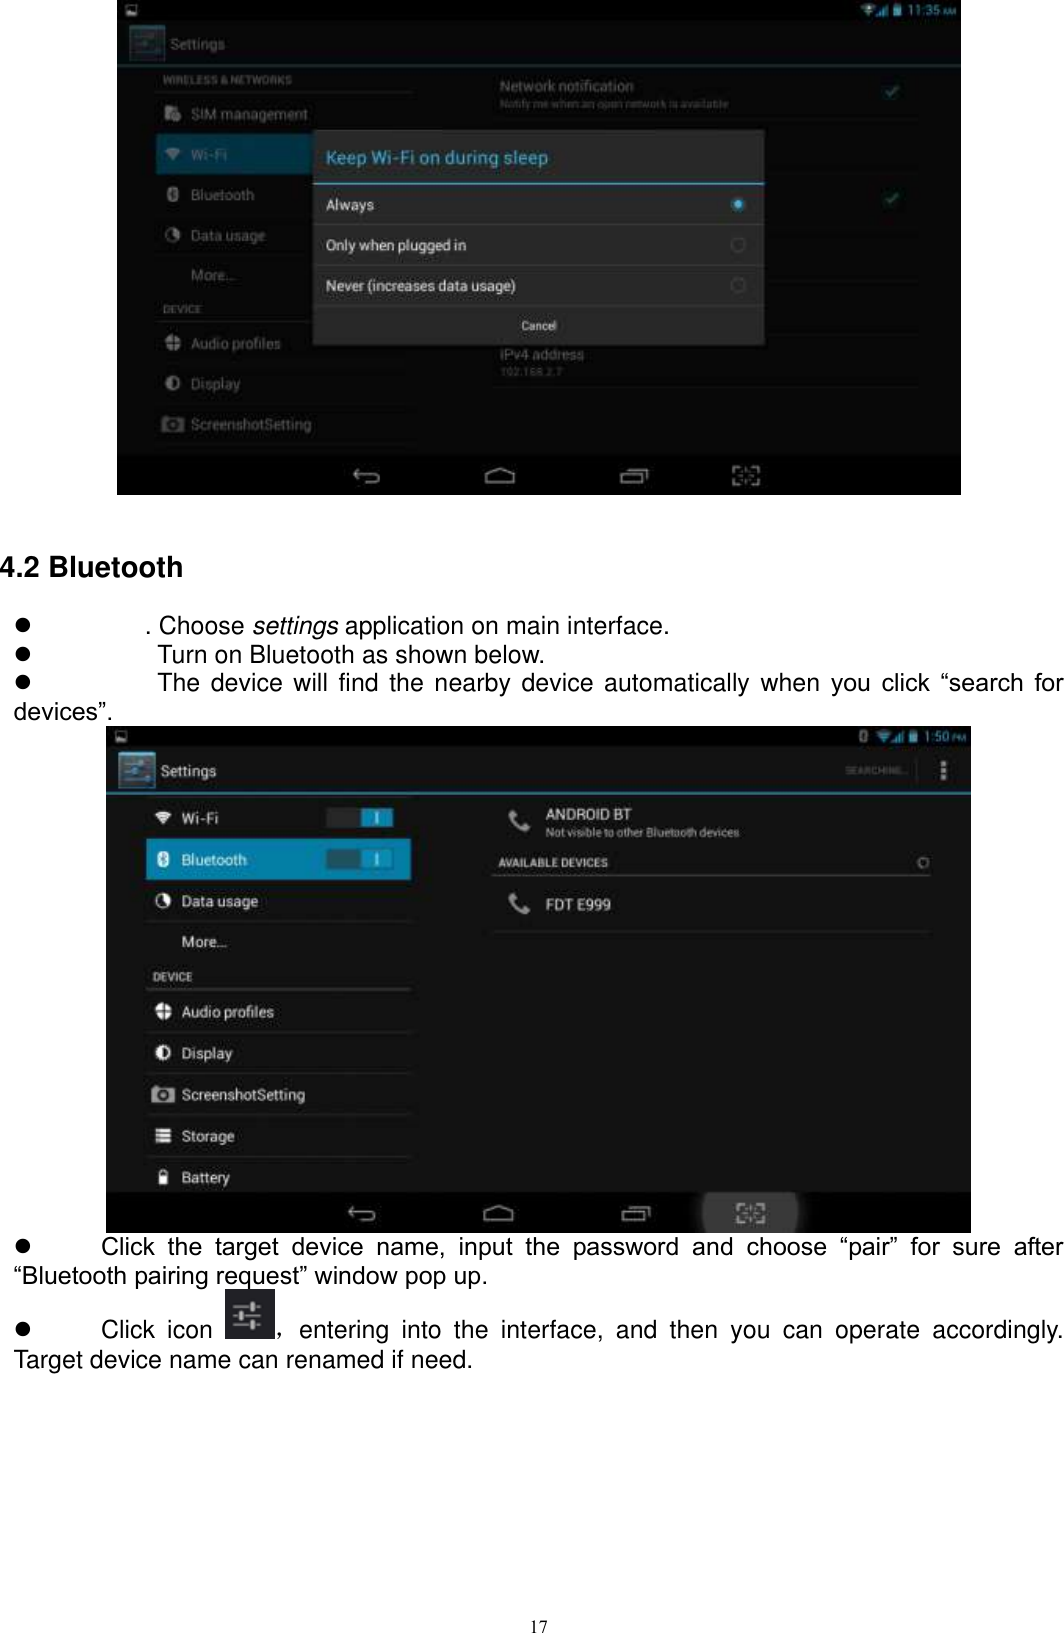      17   4.2 Bluetooth   . Choose settings application on main interface.     Turn on Bluetooth as shown below.     The device  will find the nearby device automatically  when  you  click  “search  for devices”.   Click  the  target  device  name,  input  the  password  and  choose  “pair”  for  sure  after “Bluetooth pairing request” window pop up.     Click  icon  ，entering  into  the  interface,  and  then  you  can  operate  accordingly. Target device name can renamed if need.   